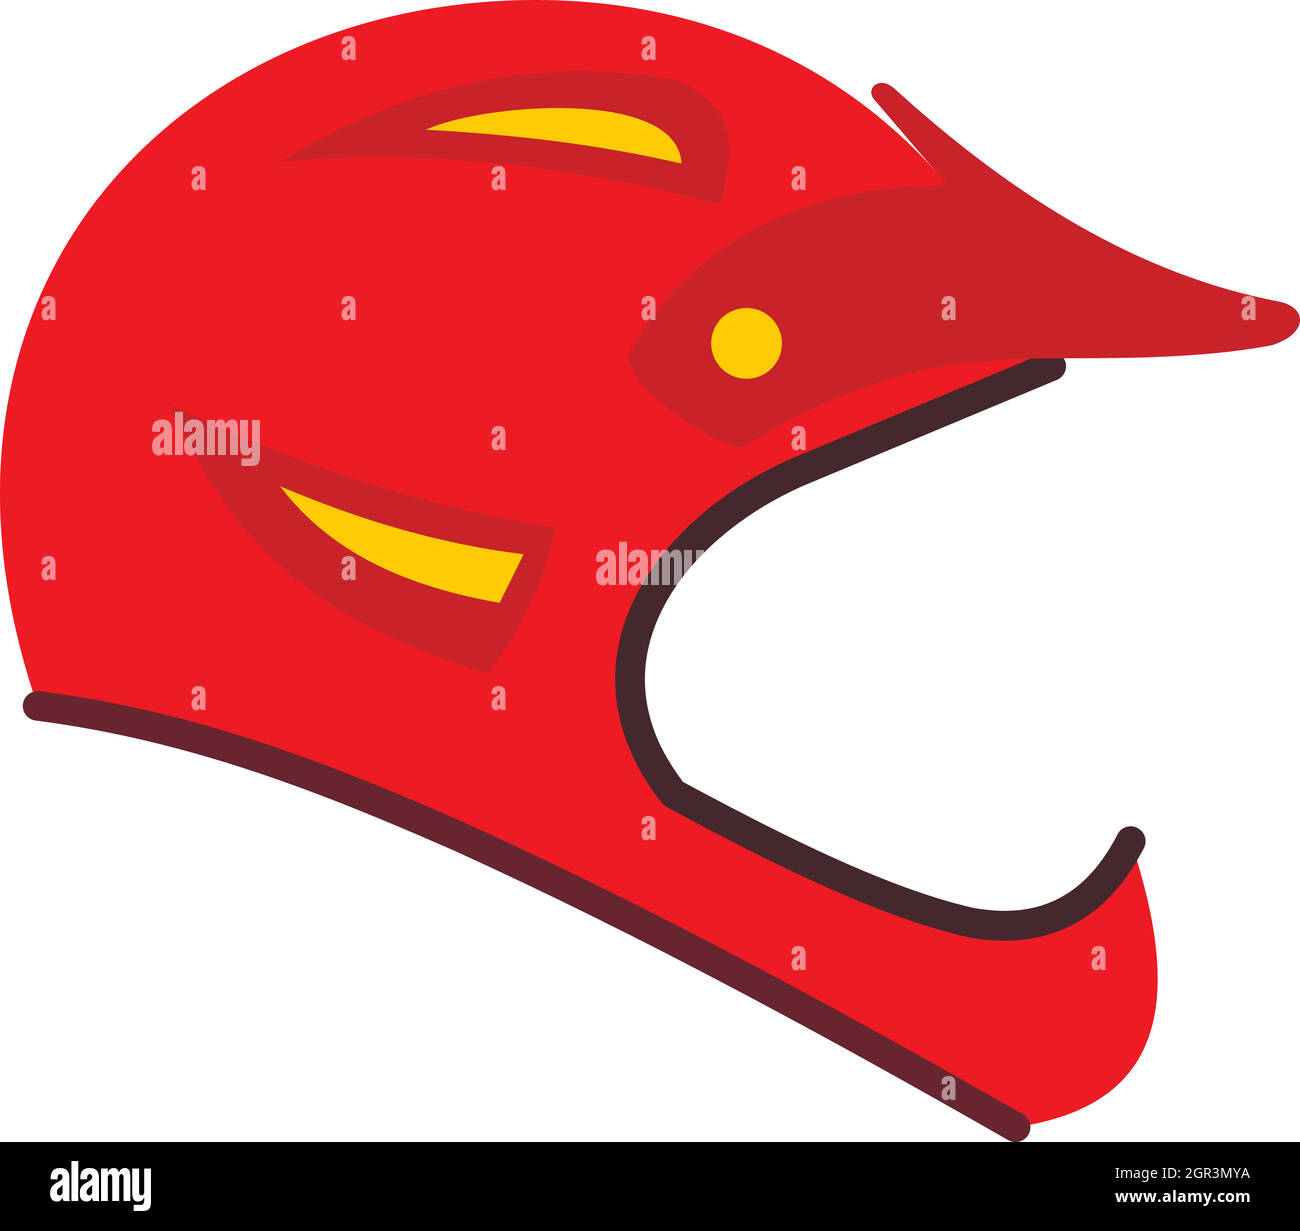 Helmet for motorcyclist icon, flat style Stock Vector